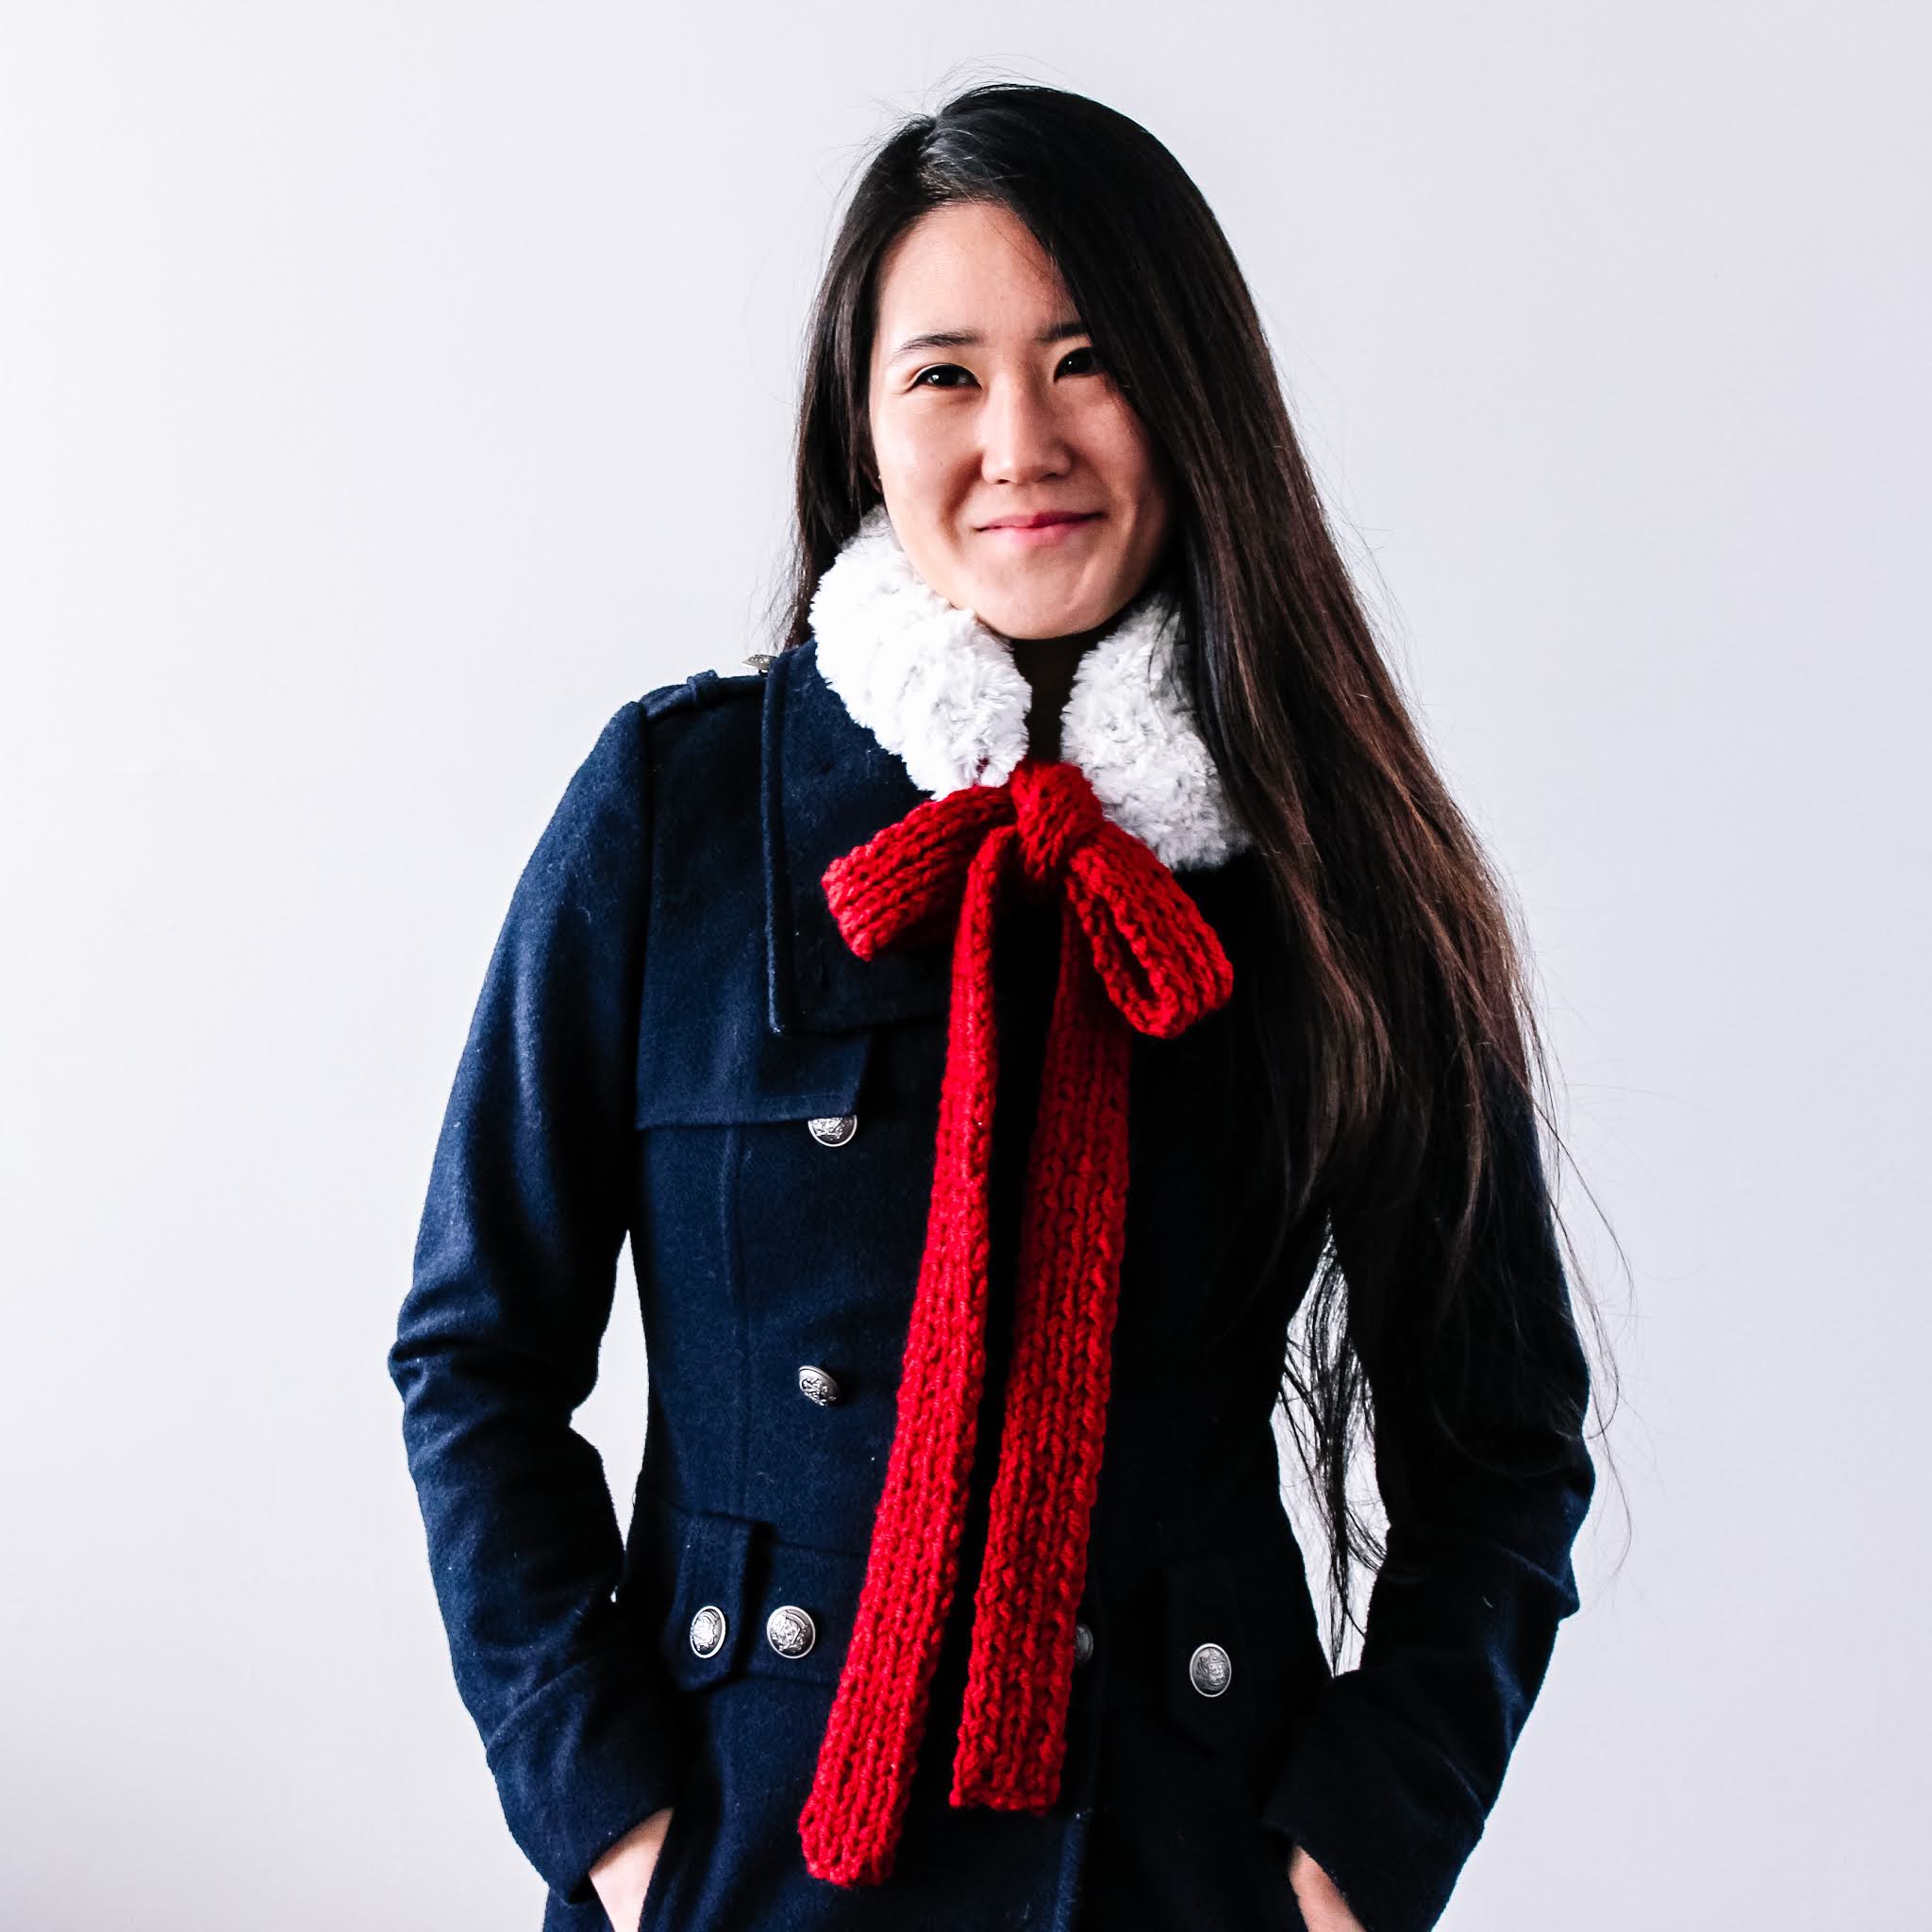 Modesty by Laura designer wearing the Holly Scarf.